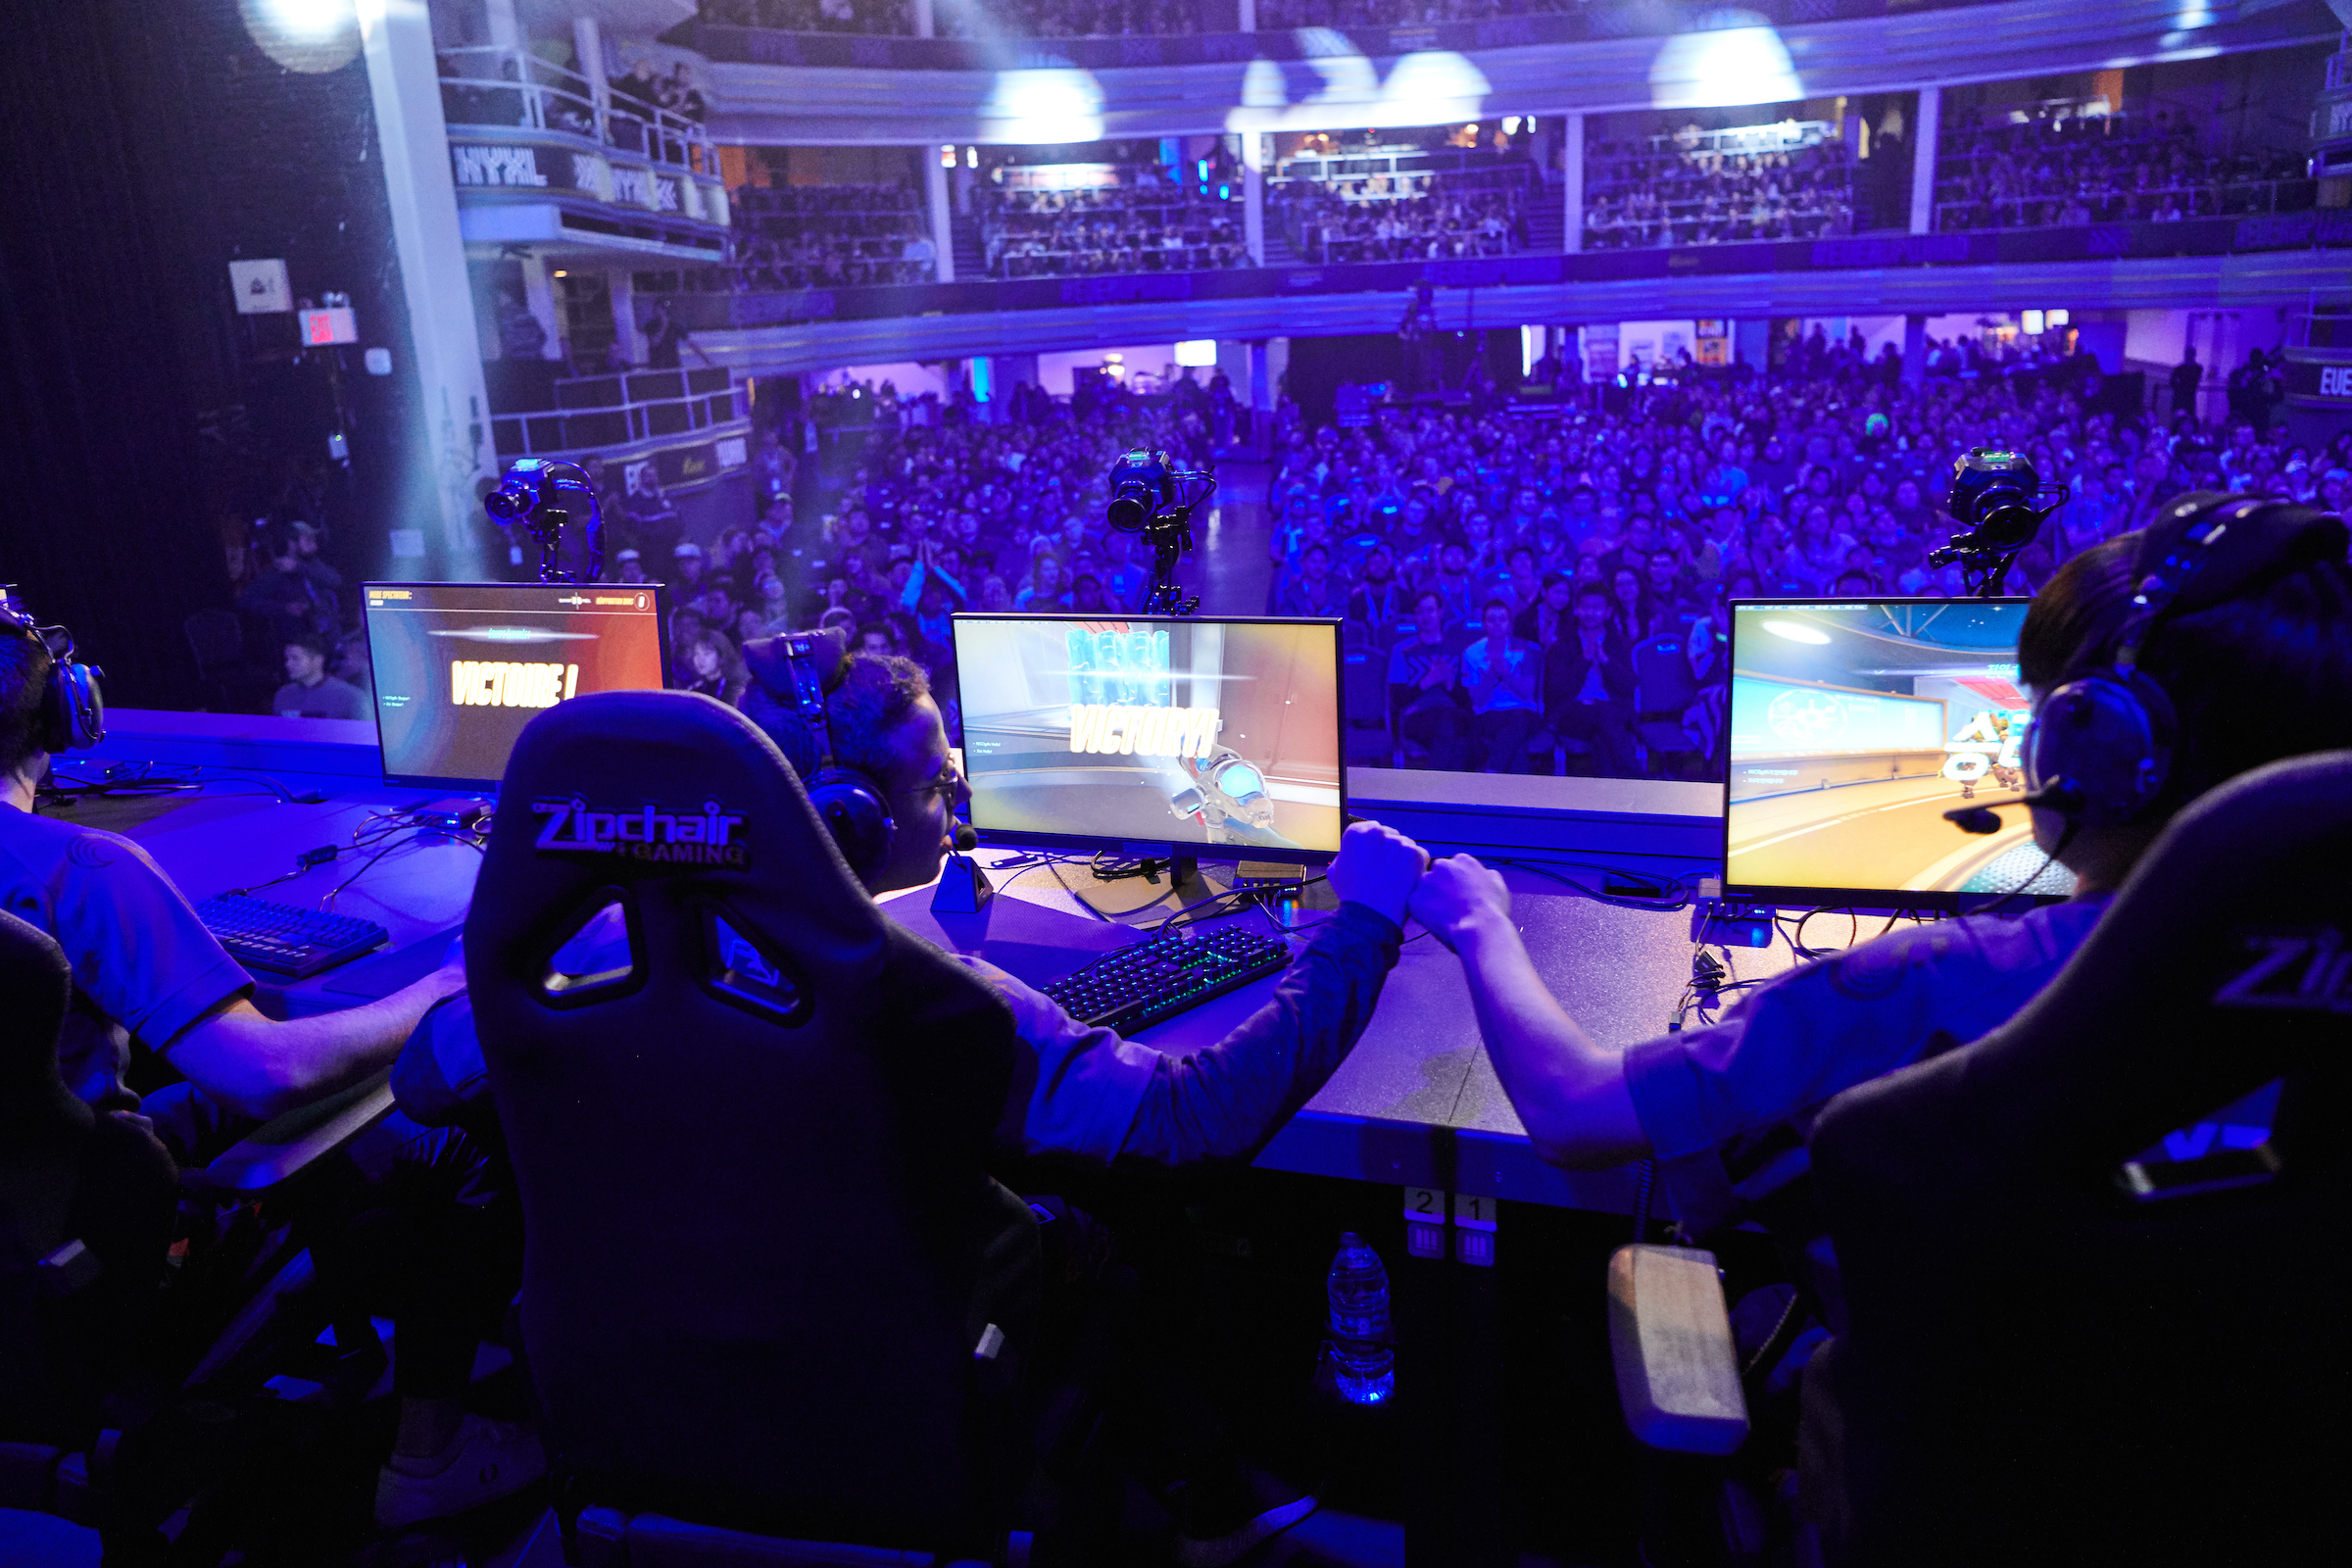 Players at an Overwatch Esports Live Event